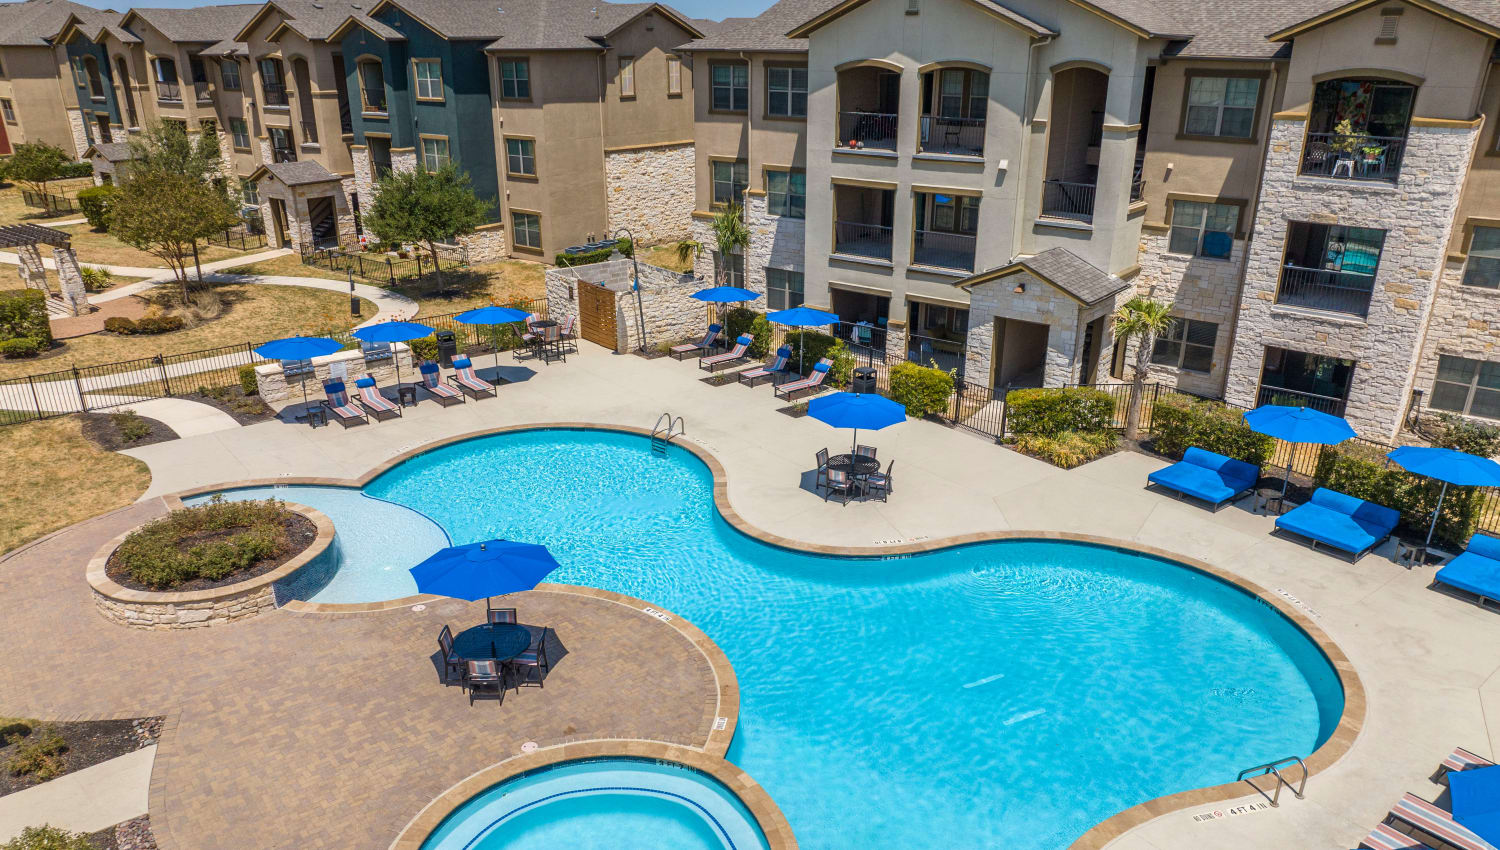 Early morning view of the pool area at Carrington Oaks in Buda, Texas